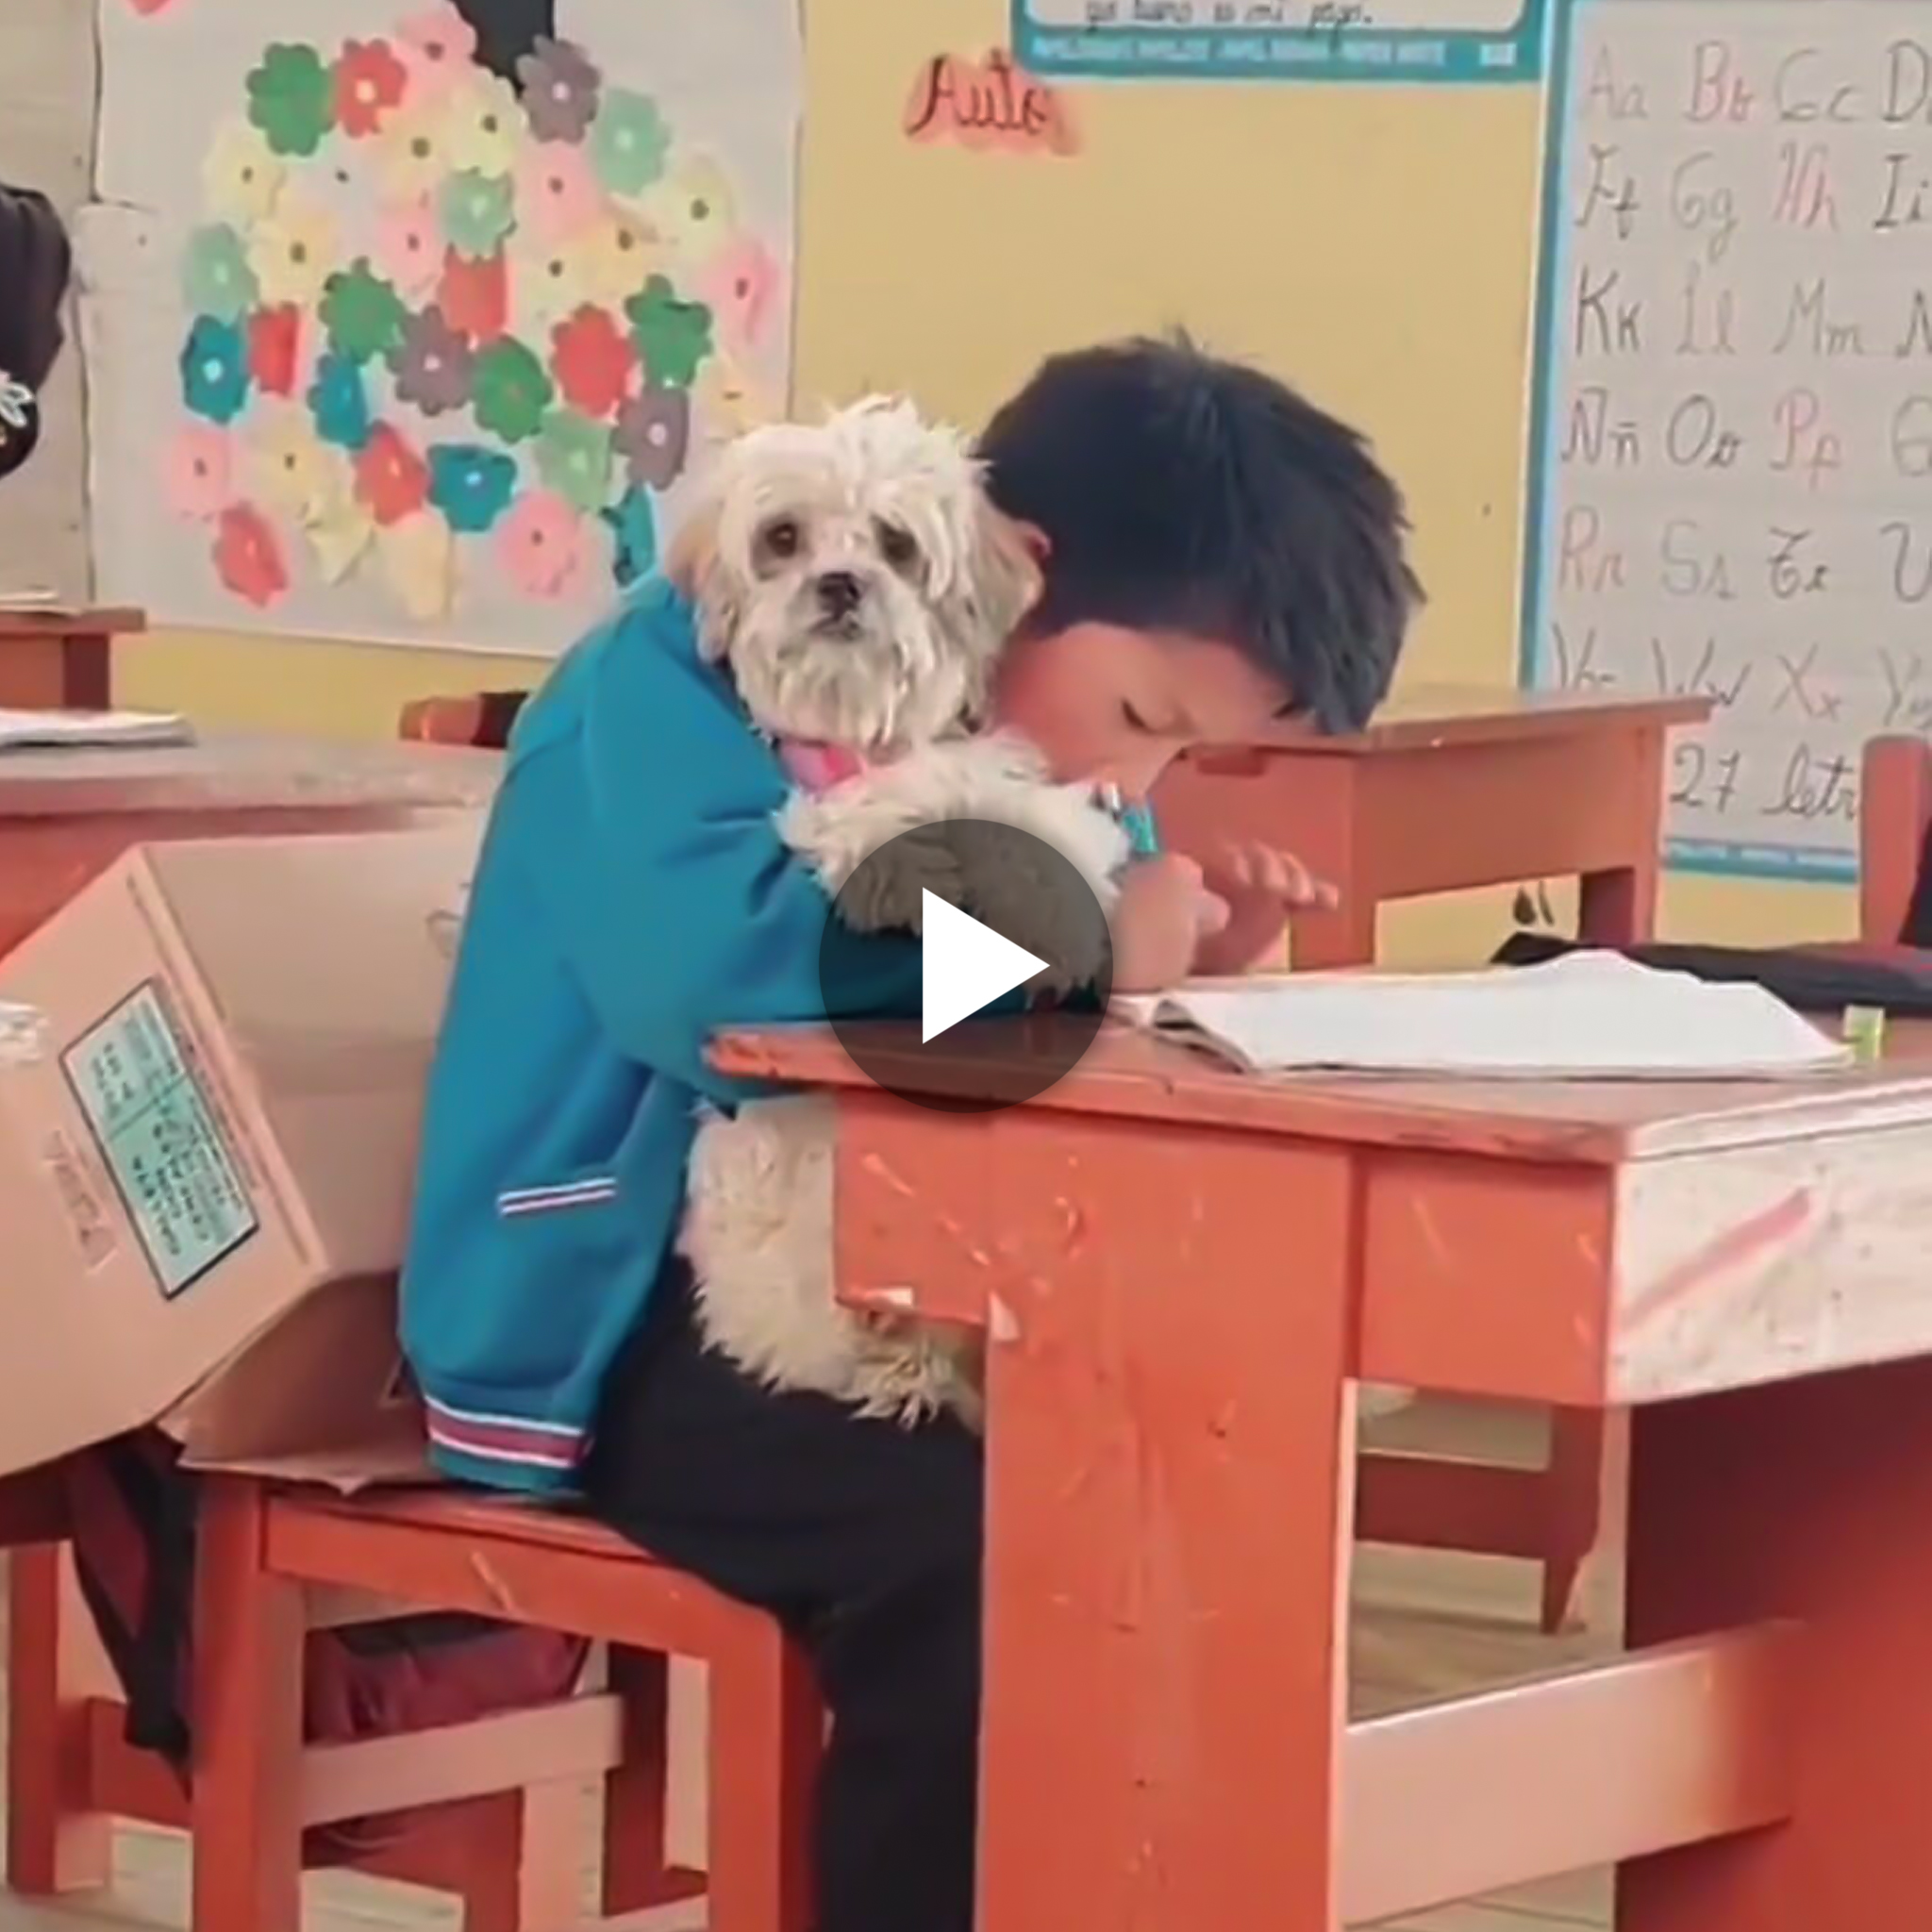 Thought the teacher would not permit the student to bring his puppy to school, the student insisted on doing so, but how could he resist the adorable nature of their friendship?